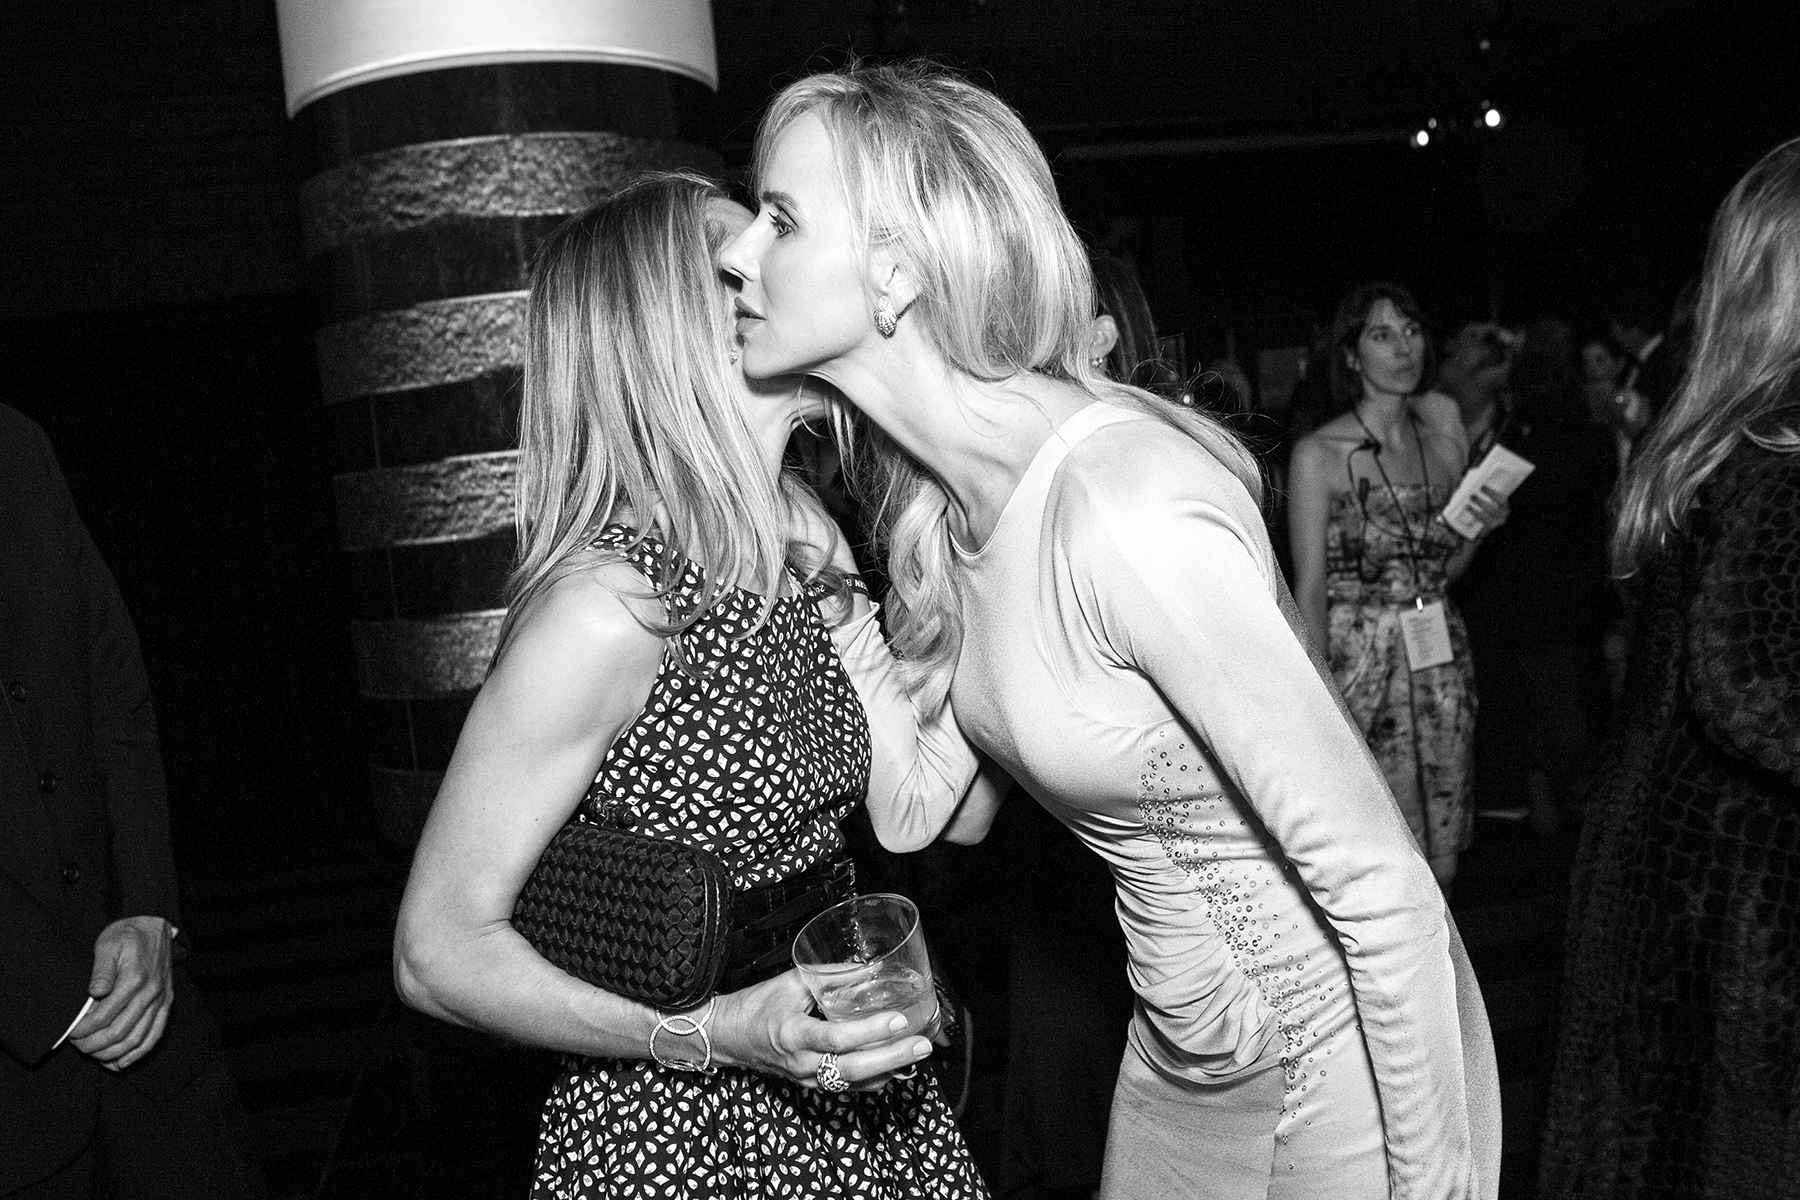 Vanessa Getty leans in to speak with her friend Juliet de Baubigny during cocktail hour at the Modern Ball, a fundraiser for the San Francisco Museum of Modern Art, in San Francisco, Calif., on Wednesday, April 24, 2012.This photograph is of a candid moment and was not directed in any way.